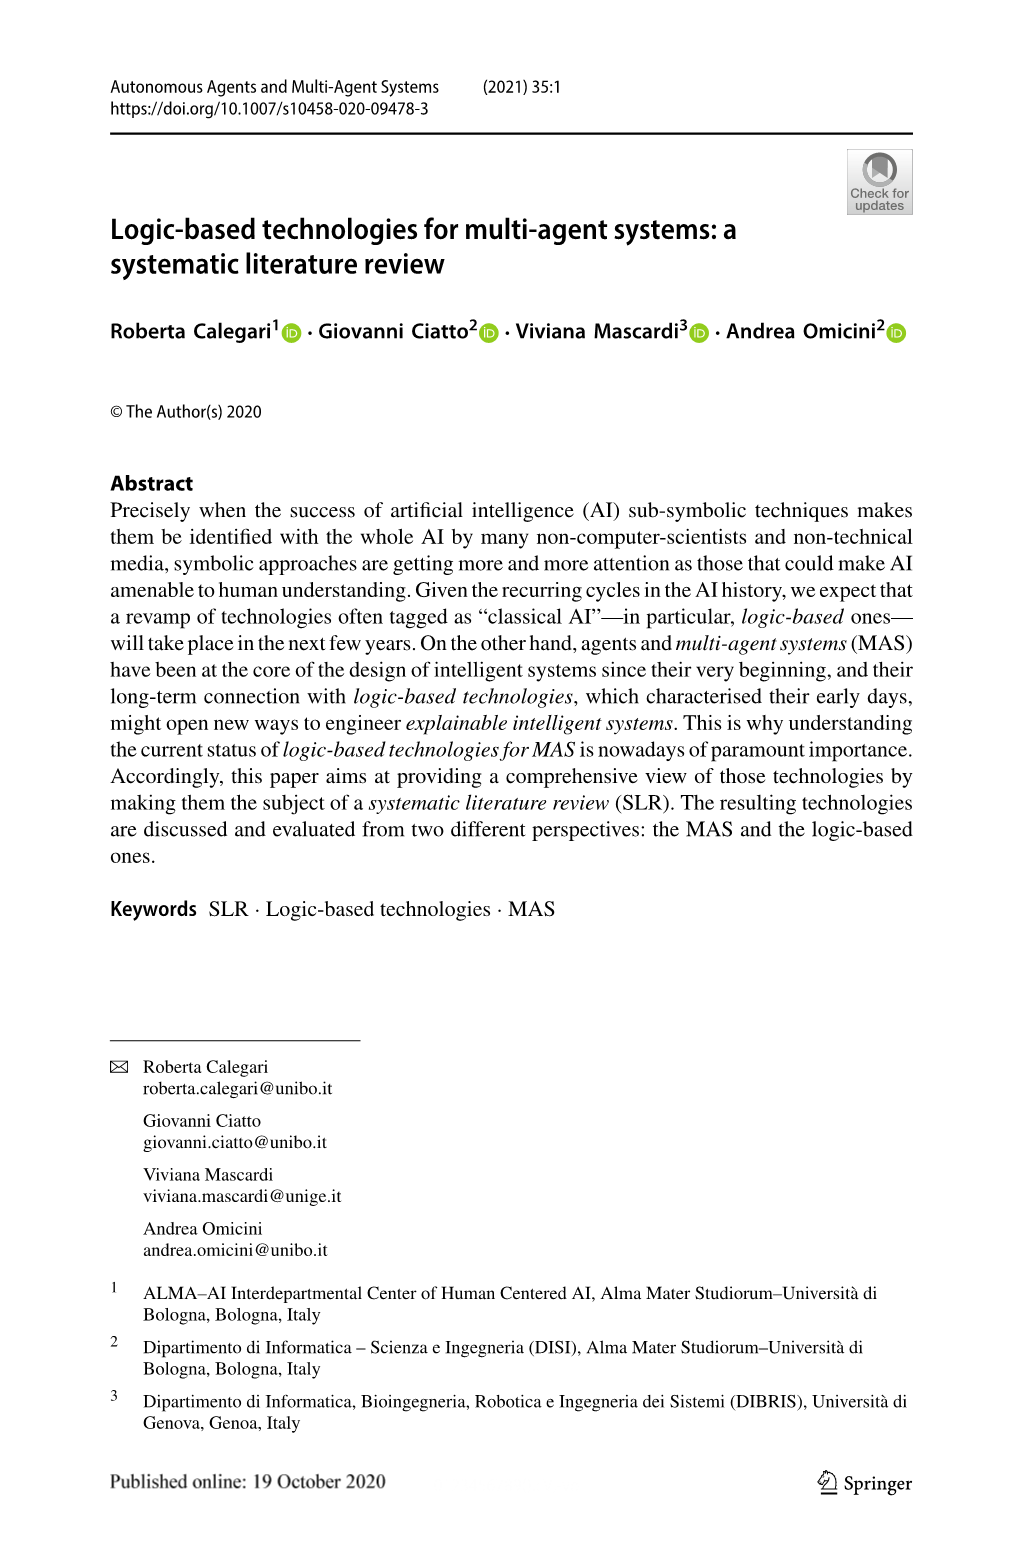 Logic-Based Technologies for Multi-Agent Systems: a Systematic Literature Review